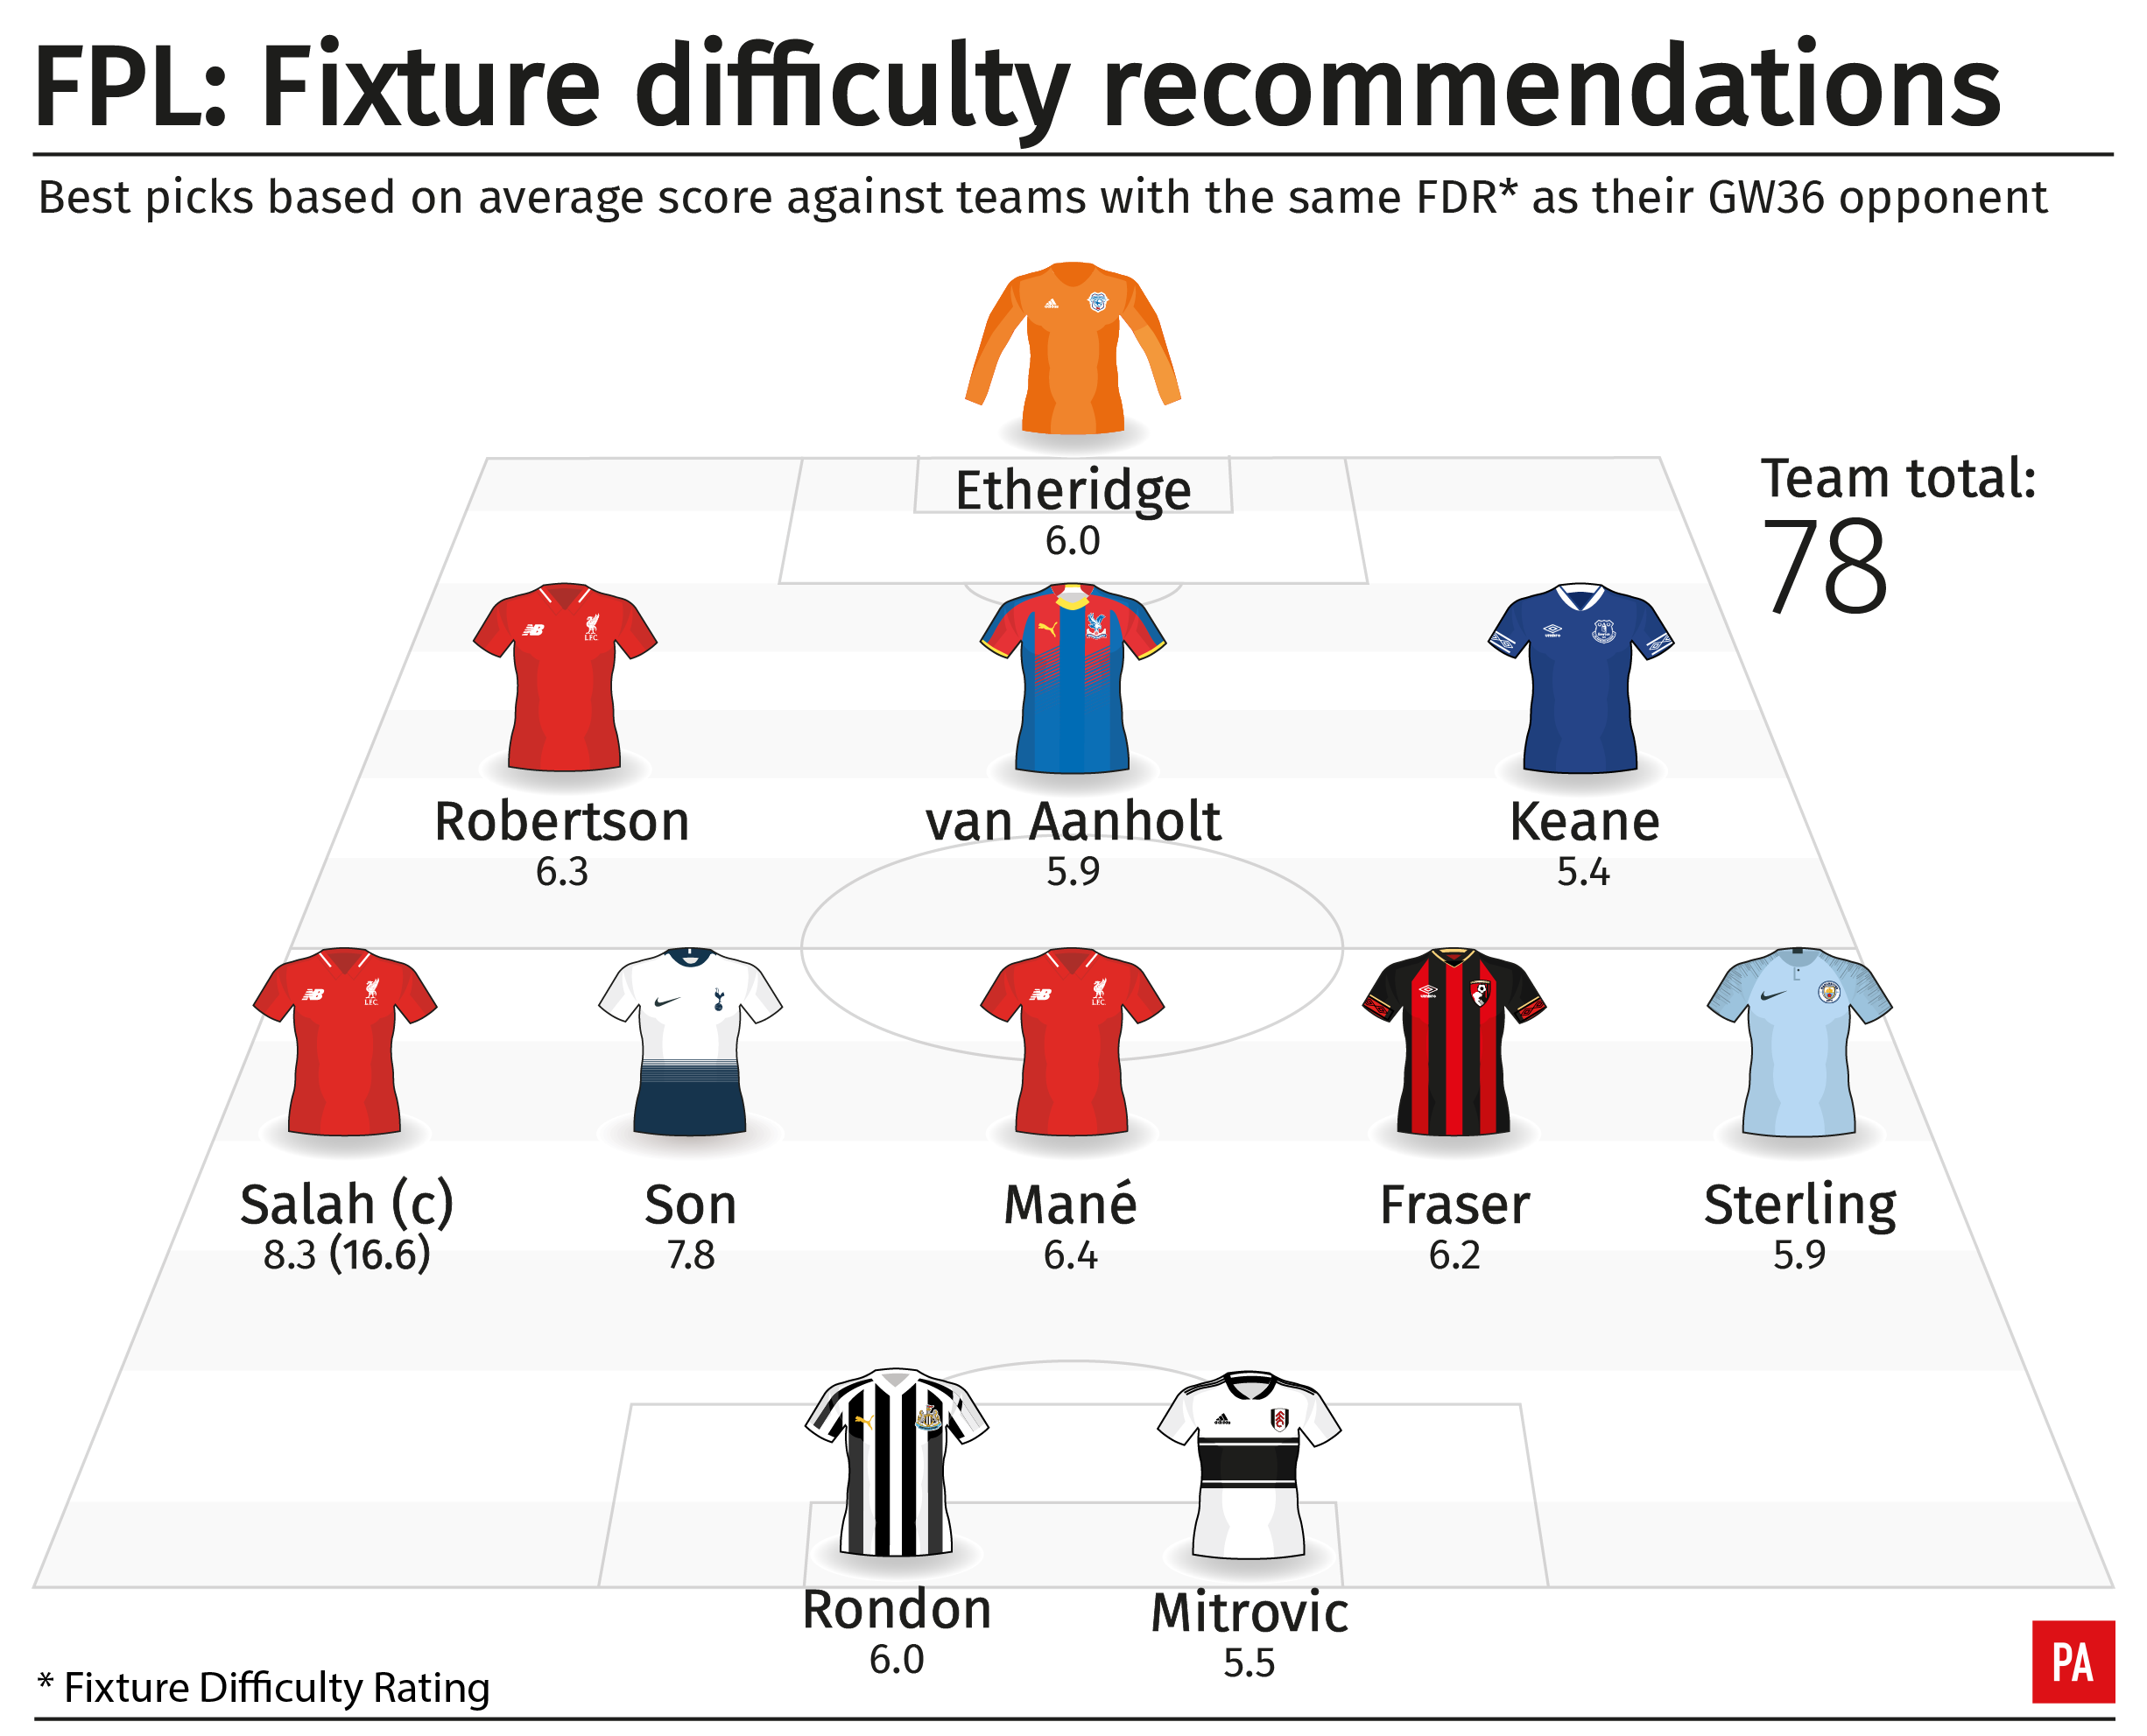 A graphic showing the best Fantasy Premier League team to select according to fixture difficulty and projected points